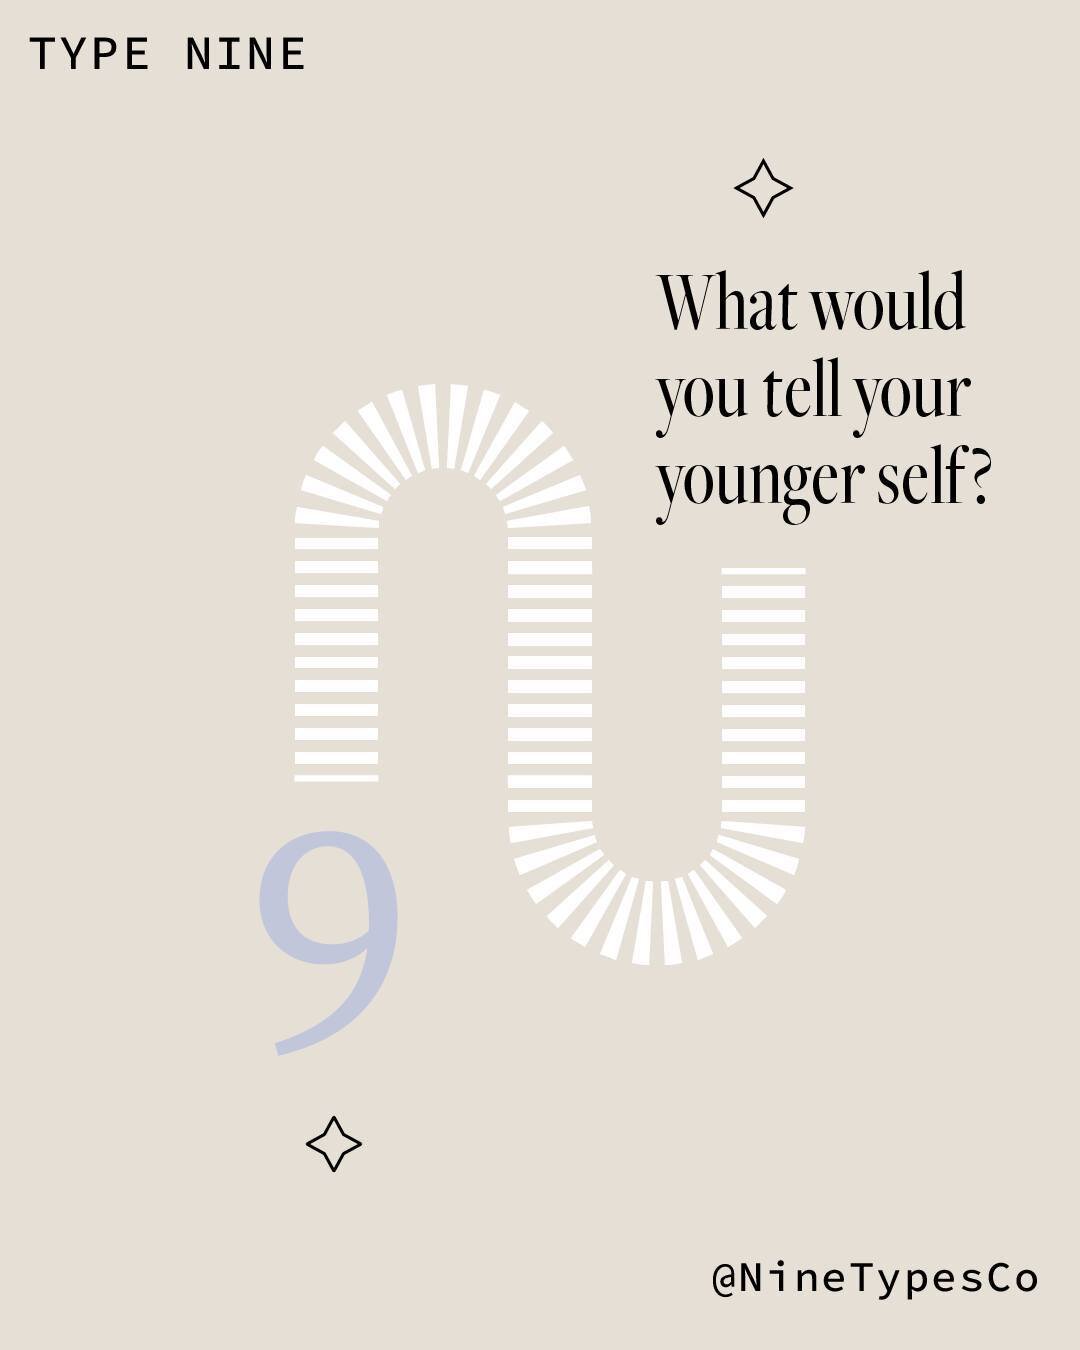 What would you tell your younger self?

I love this question because it always helps me connect with more kindness and compassion for my younger self. I often have words of wisdom for my younger self that I still need &ndash; it&rsquo;s always a good